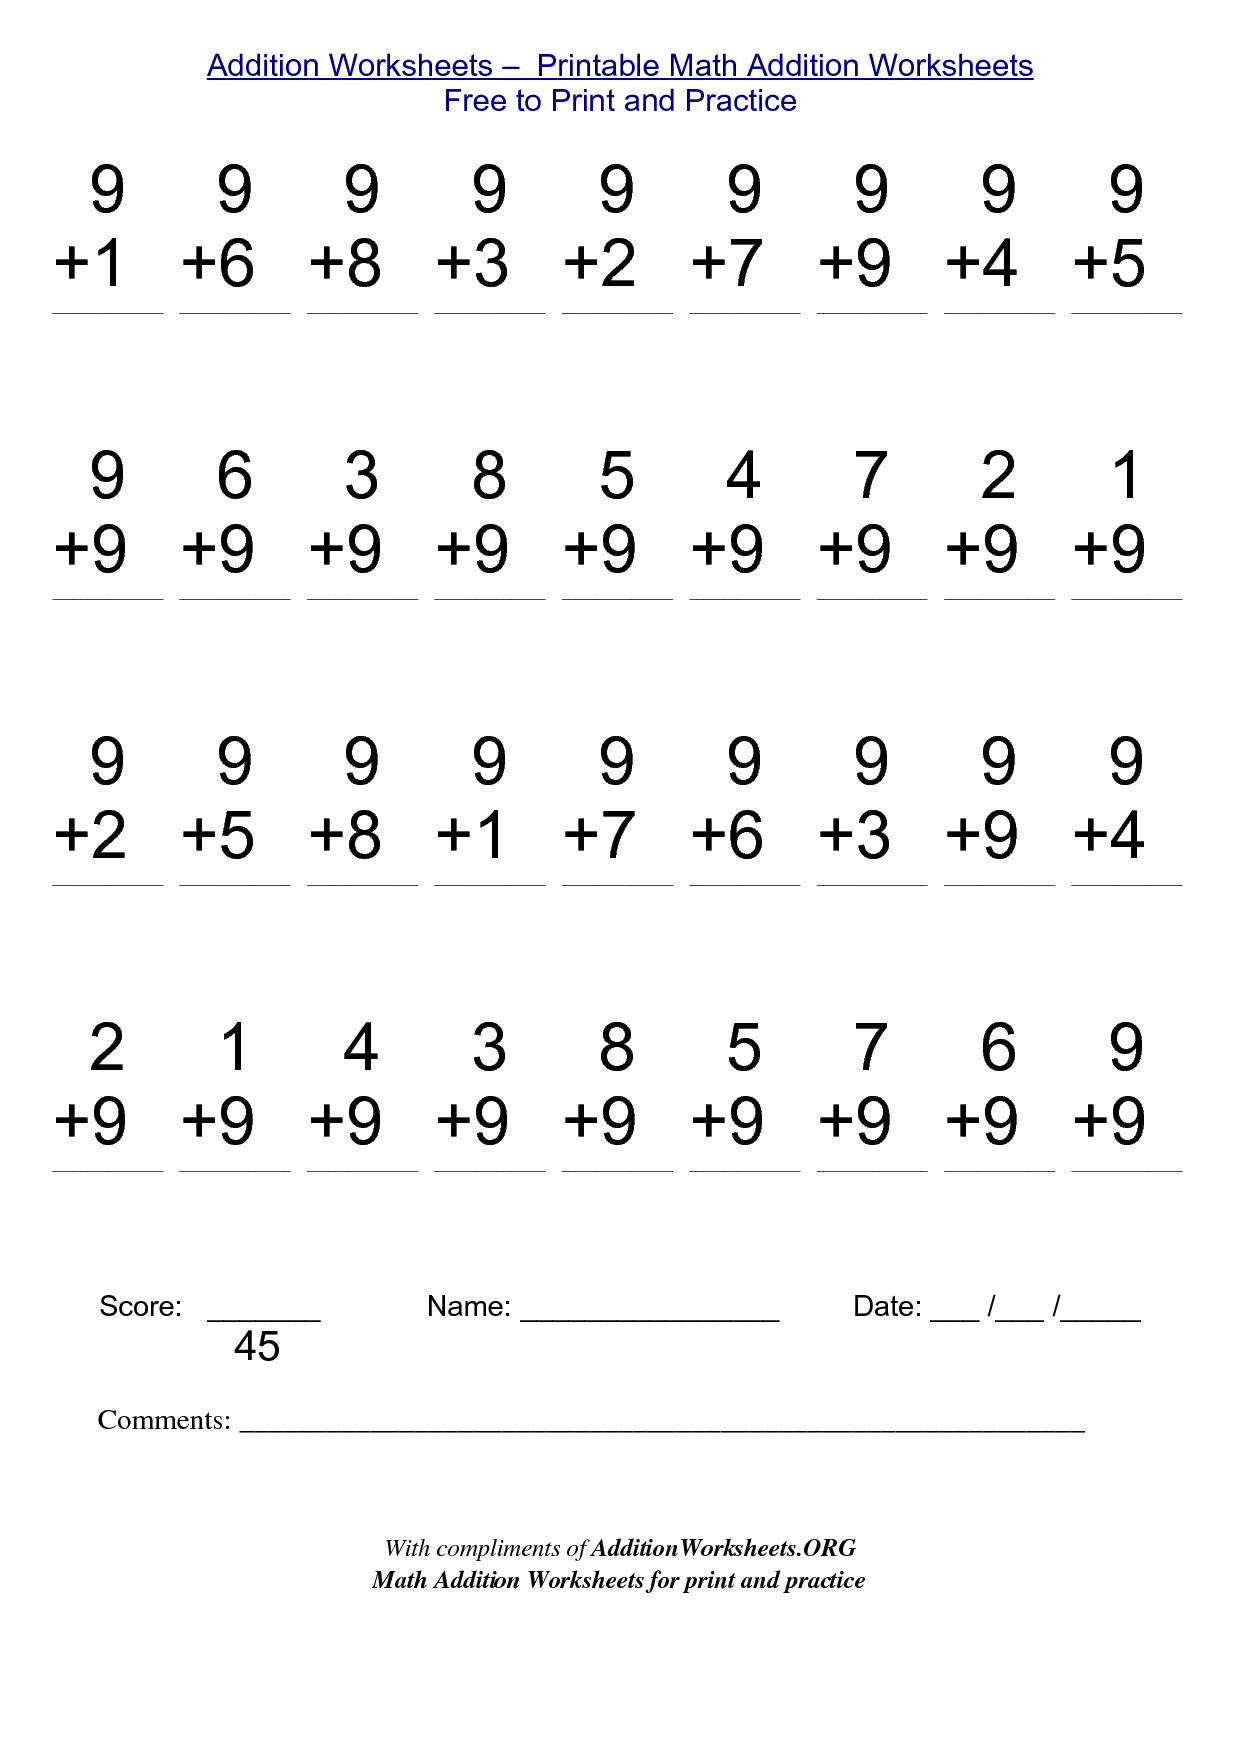 Math Worksheets For Free To Print Math Addition Worksheets Addition Worksheets 1st Grade Math Worksheets